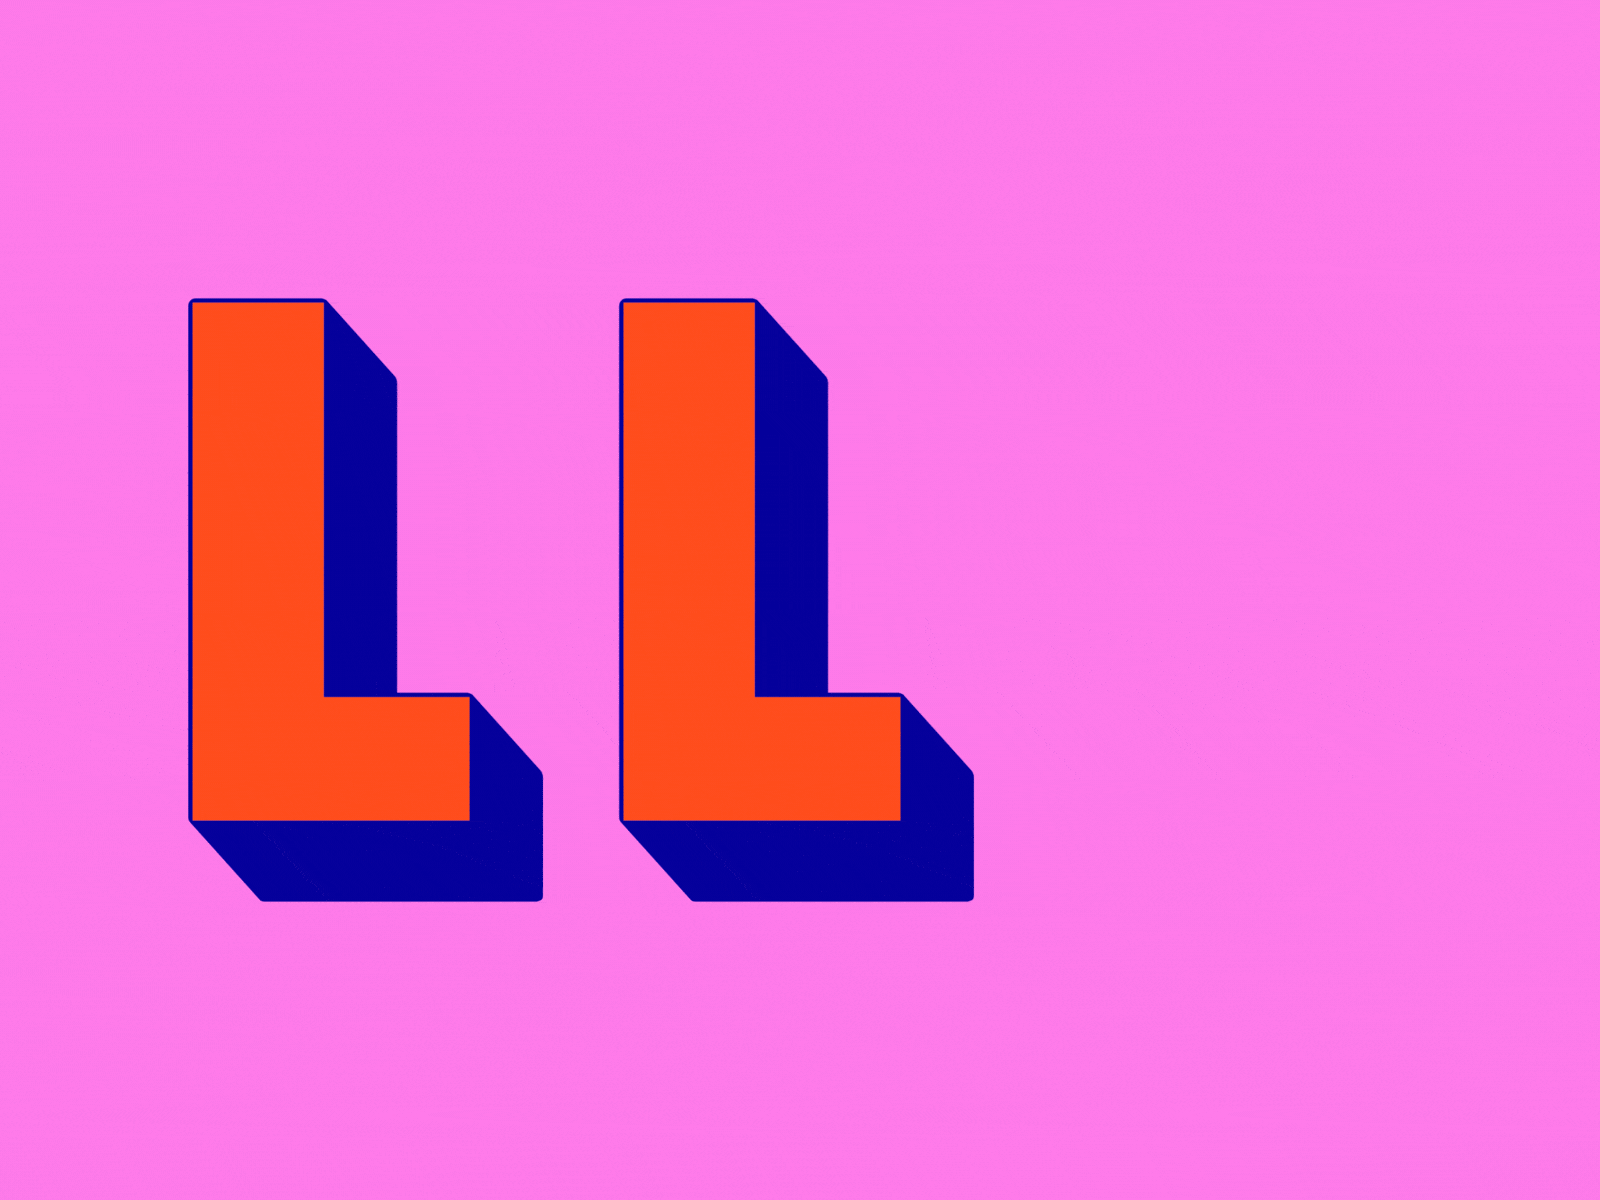 36 Days of Type - L 36 days of type 36daysoftype 36daysoftype08 36dot ae after effects animated type animation animography colors design kinetic kinetic type kinetic typography motion motion design motion graphic motion graphics type typography